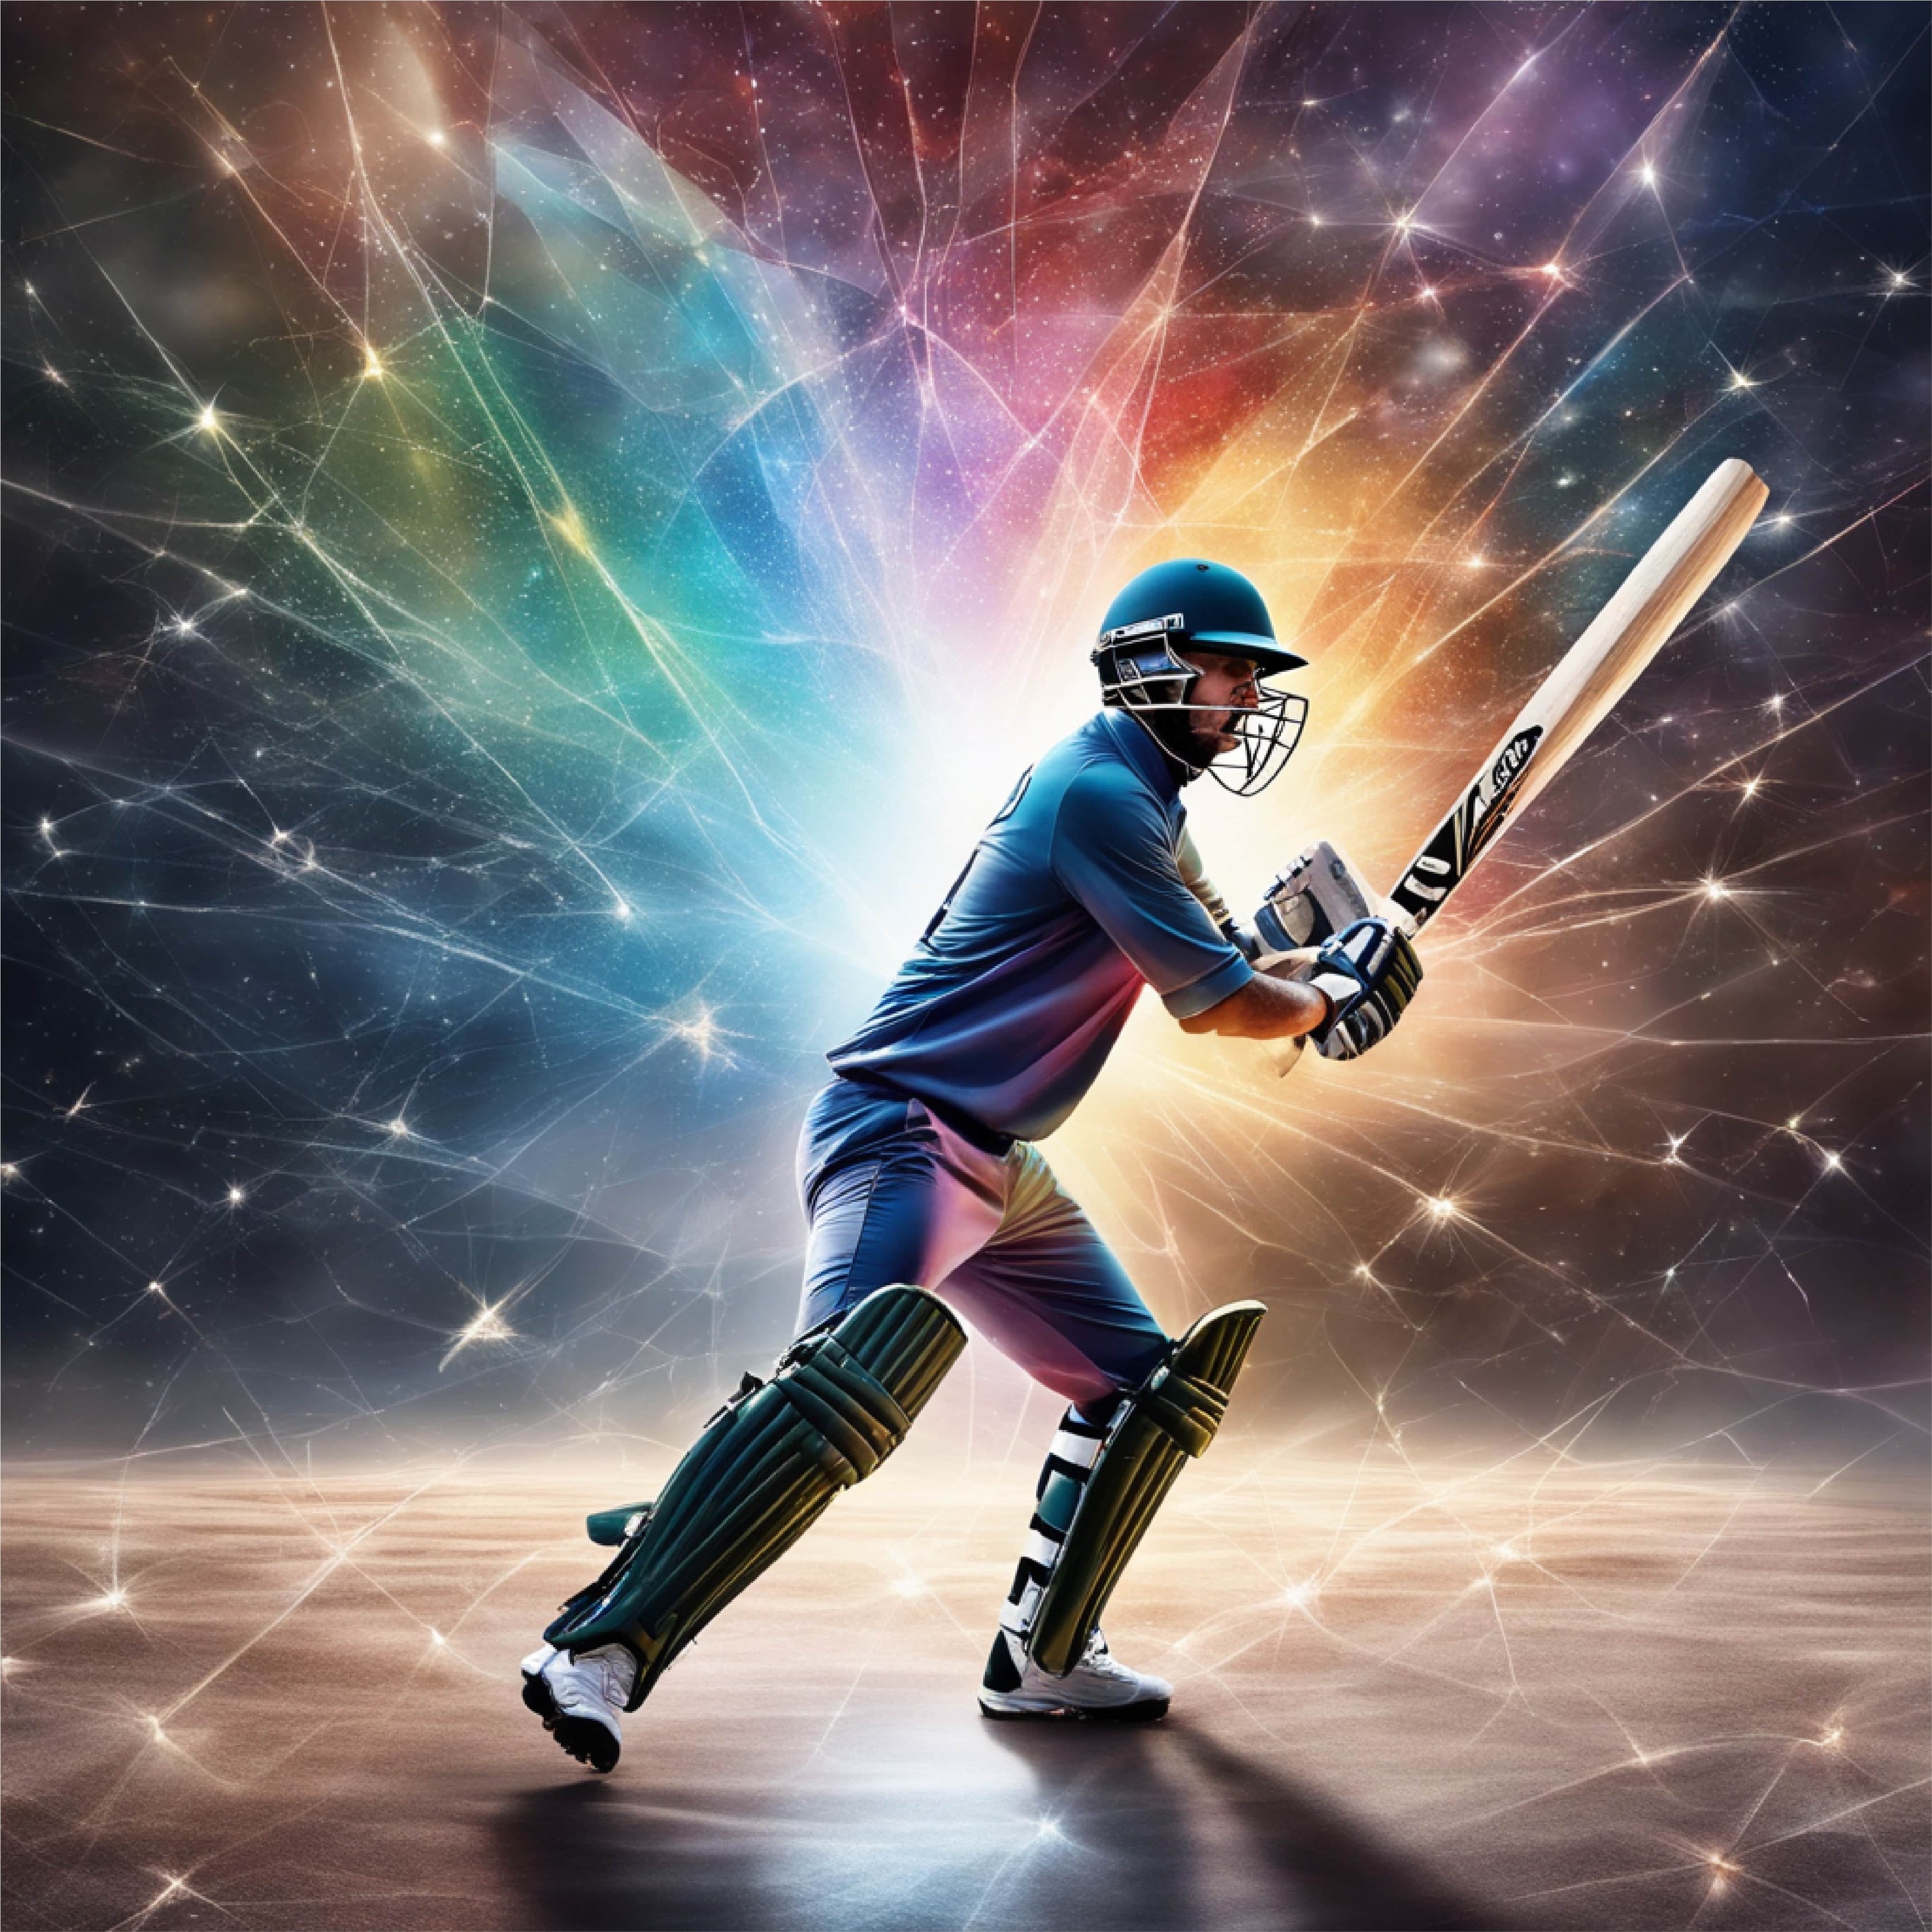 Cricket batsman during match with online cricket betting